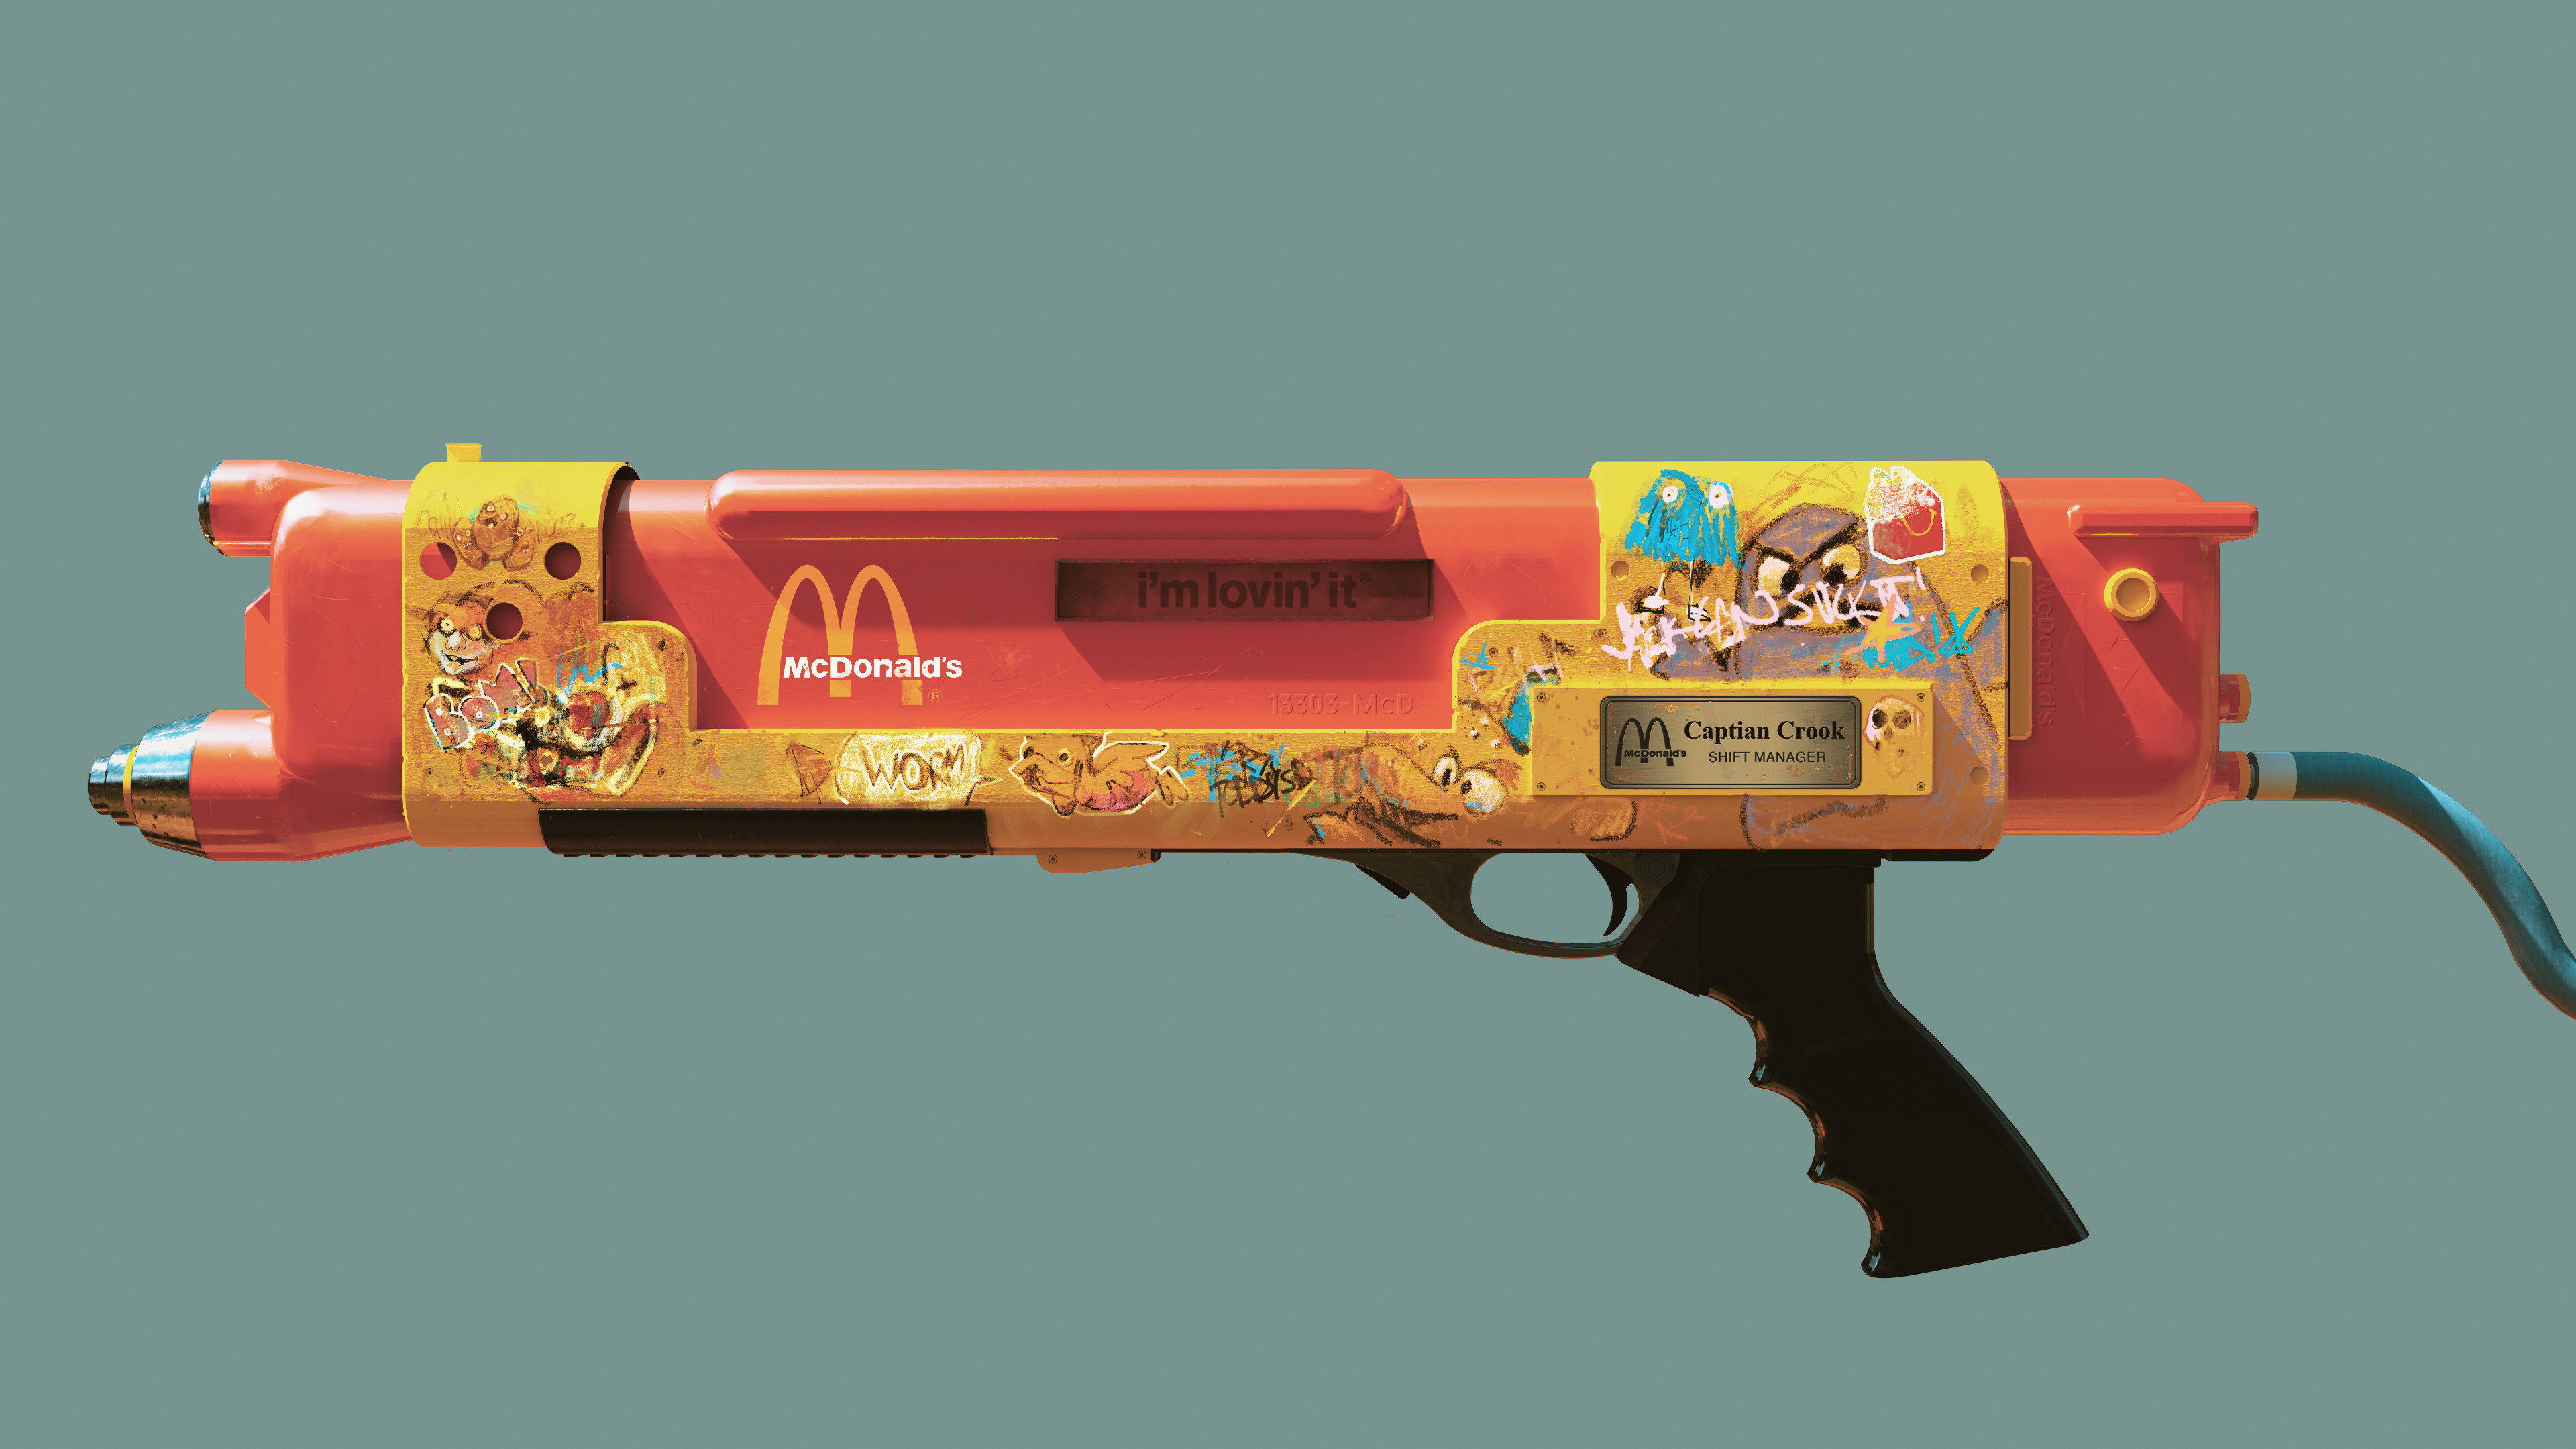 From the Fast Food Wars. Mickey D shooter.  Smells like fries.